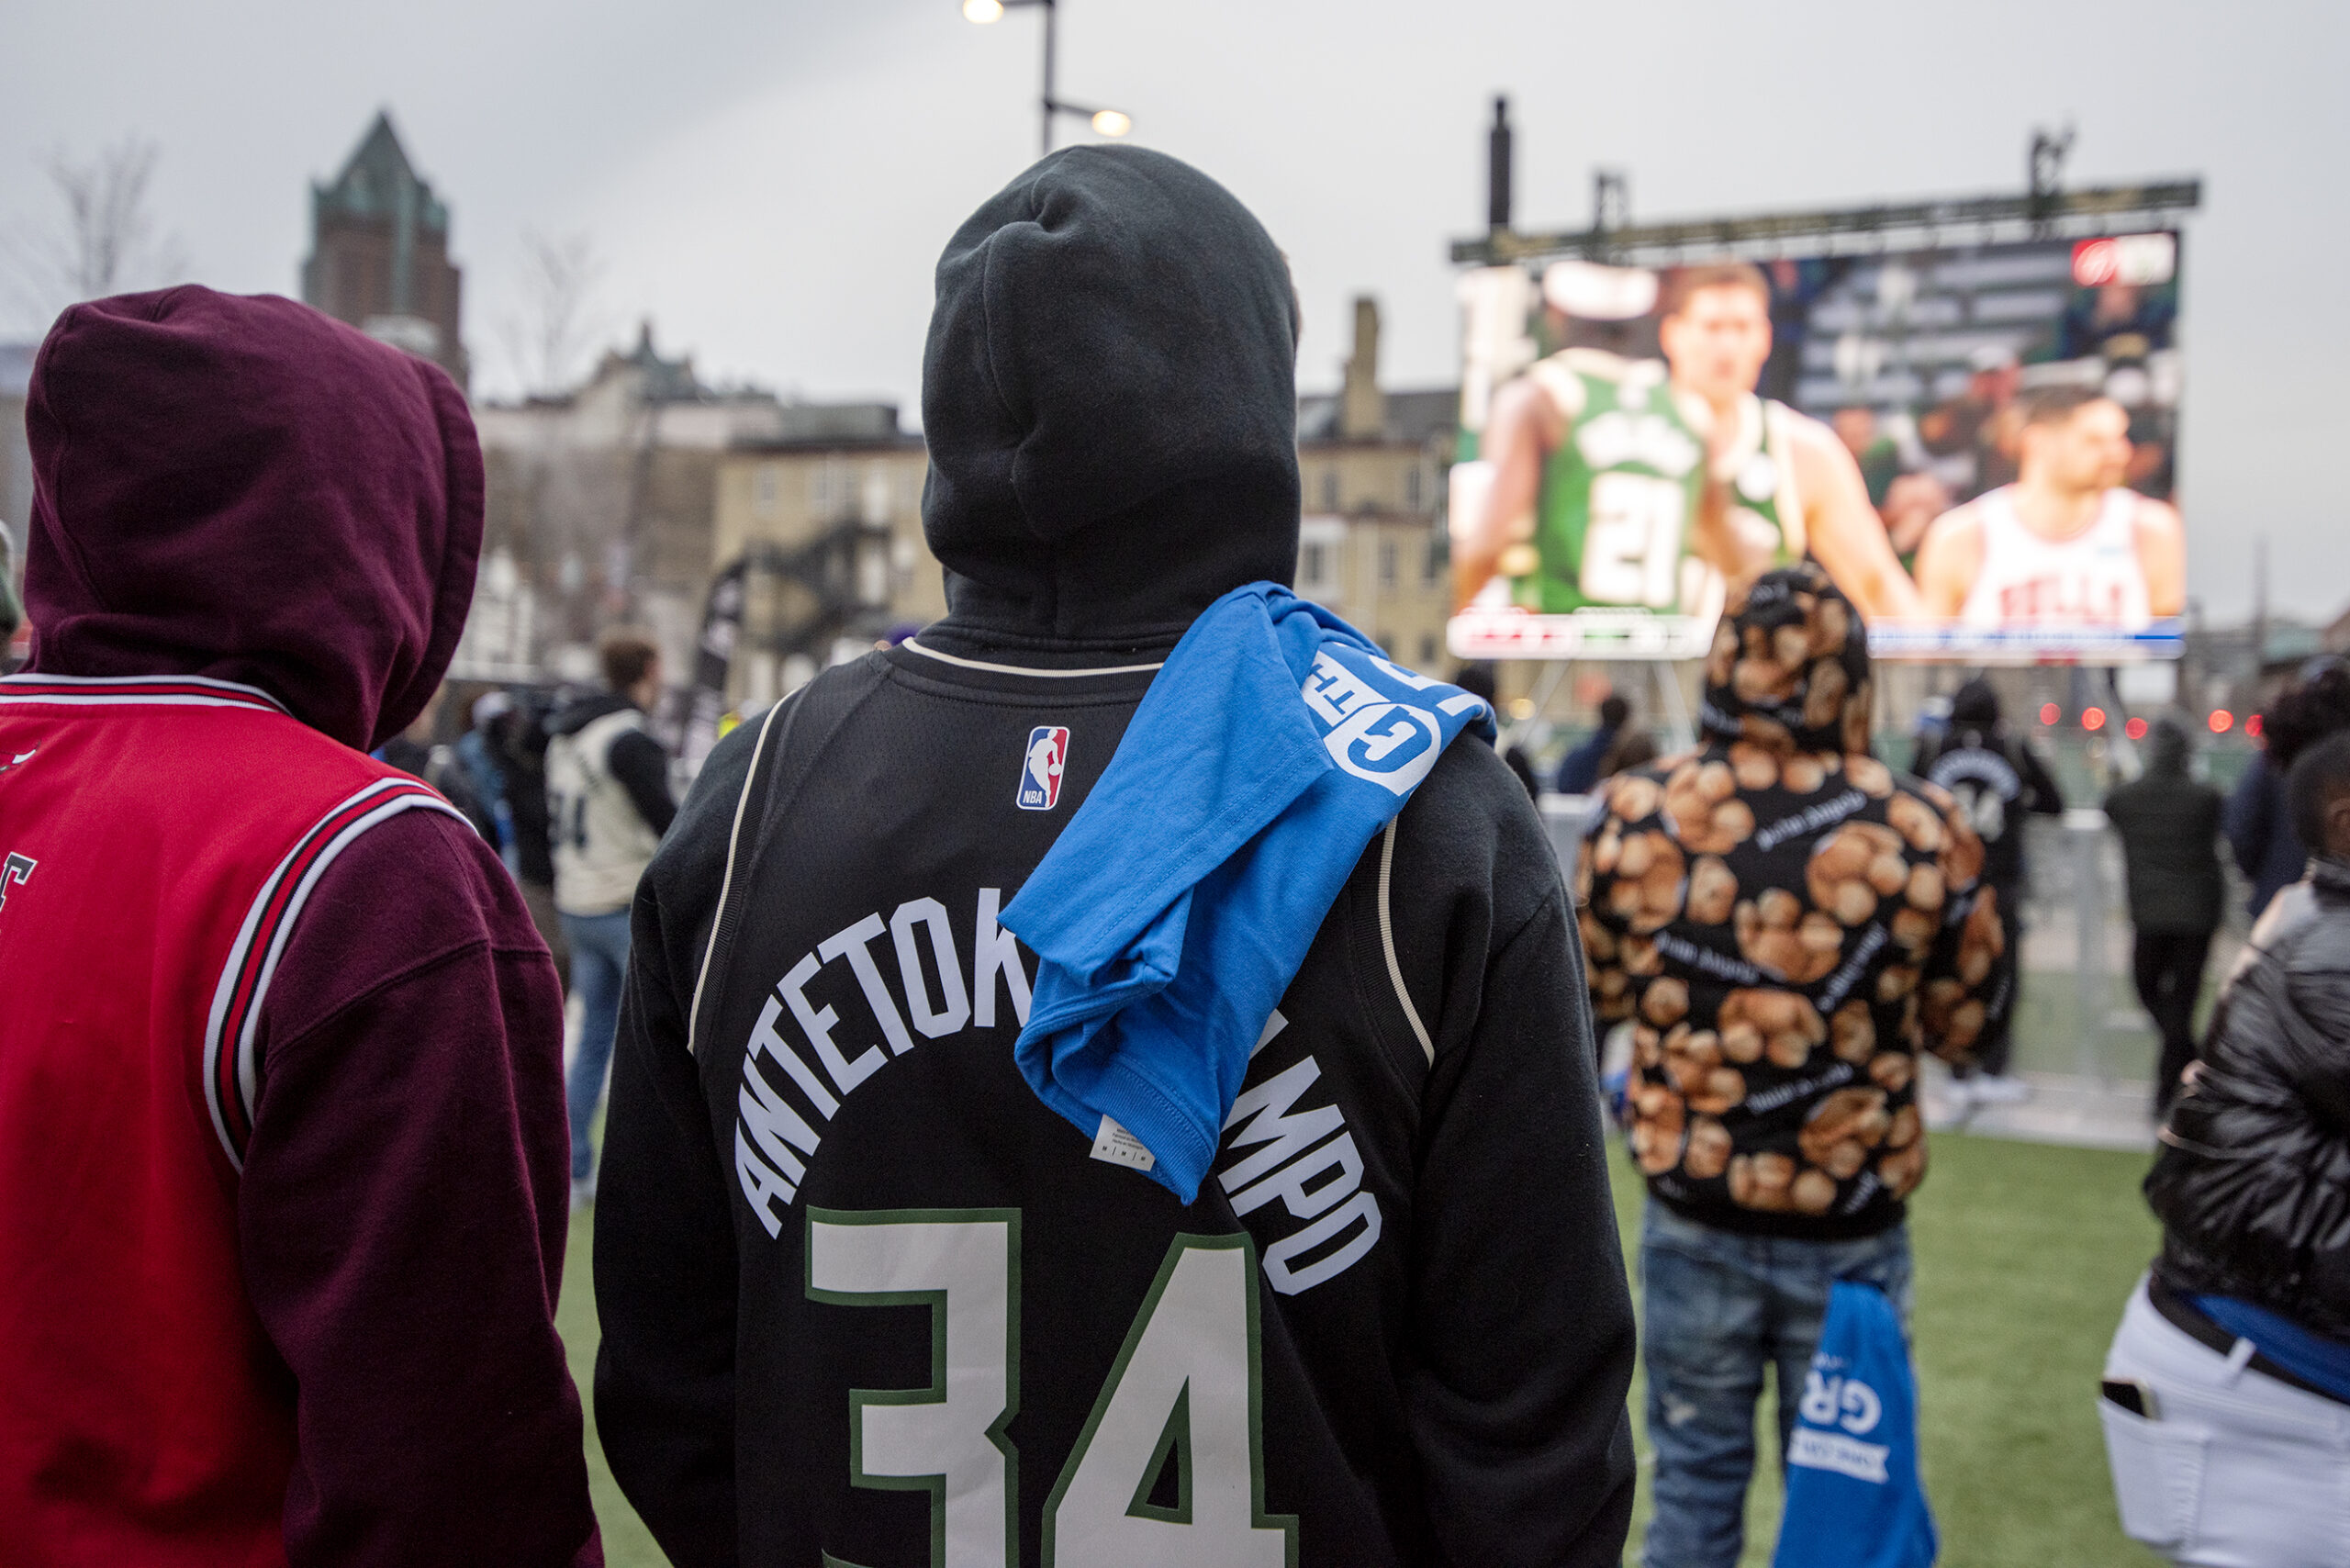 Giannis Antetokounmpo's name can be seen on the back of a fan's jersey in the Deer District.